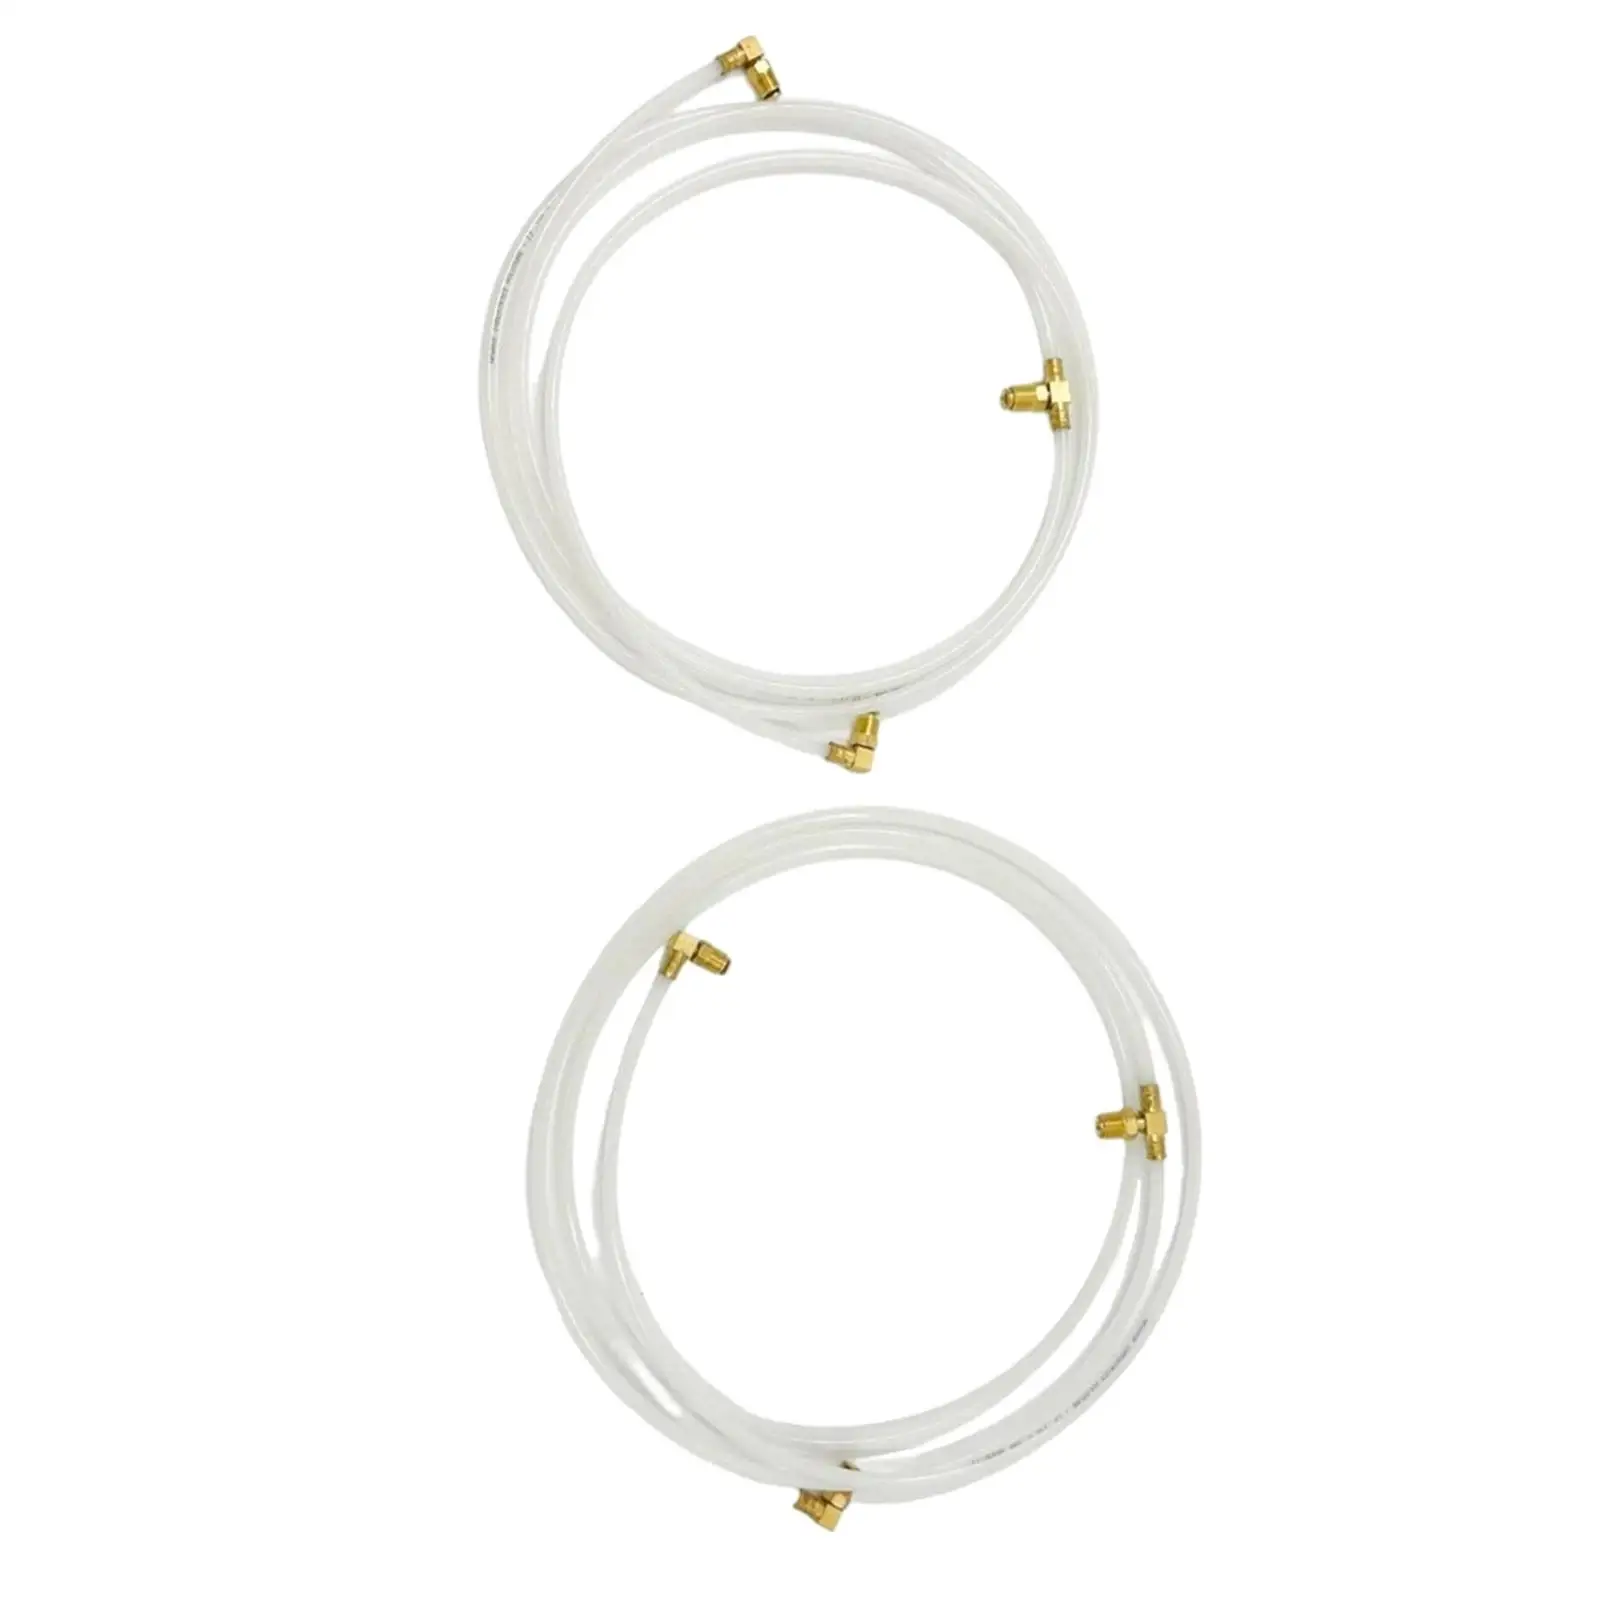 Convertible Top Hydraulic Fluid Hose Line Pair Hoses Ho-white-set for Chevrolet Chevy II Corvair Impala Quality